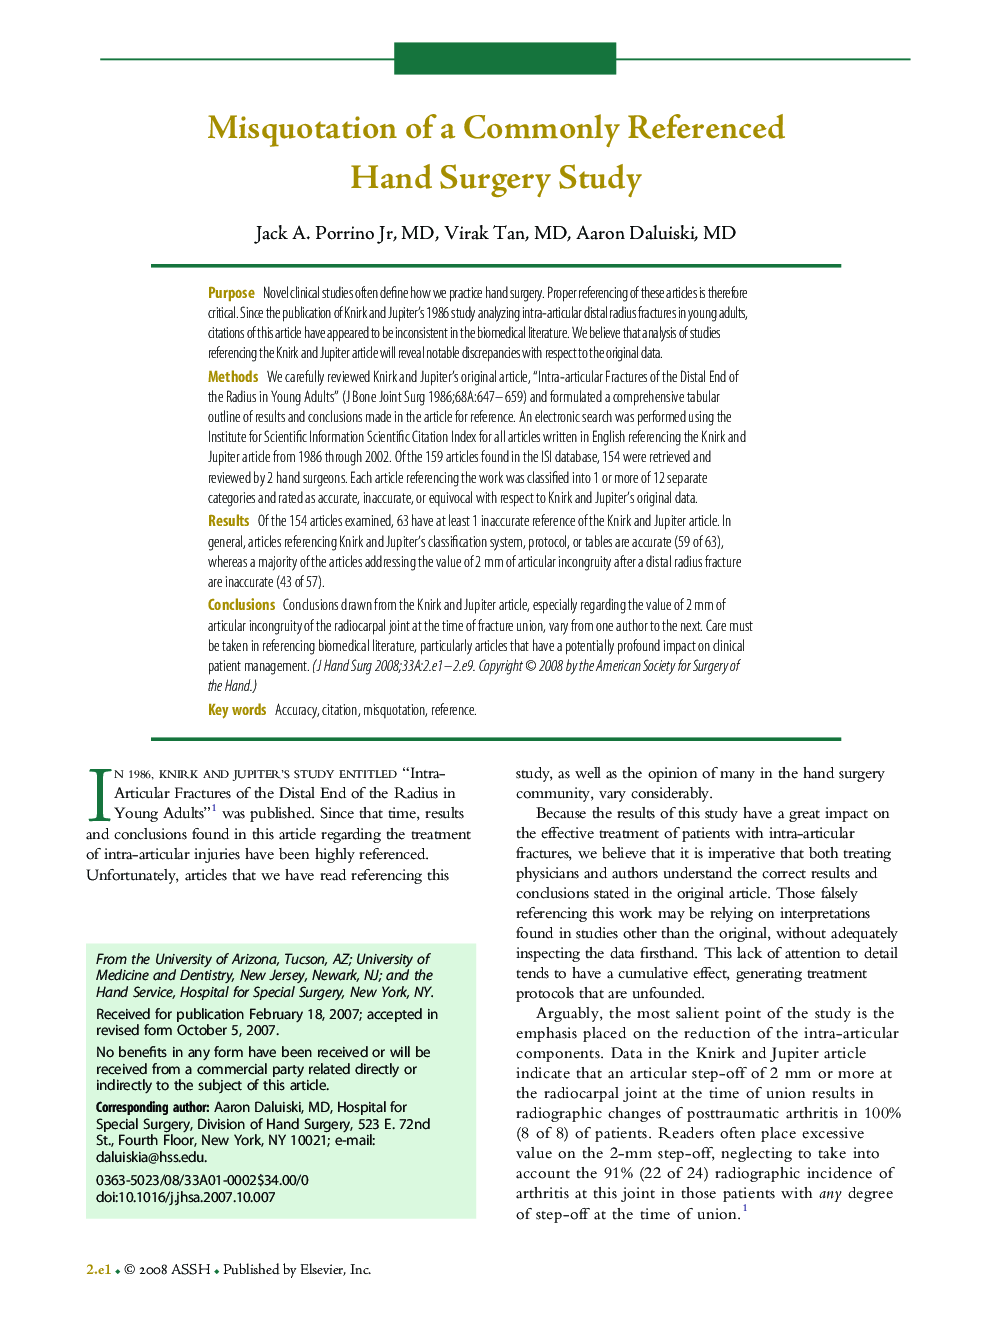 Misquotation of a Commonly Referenced Hand Surgery Study 